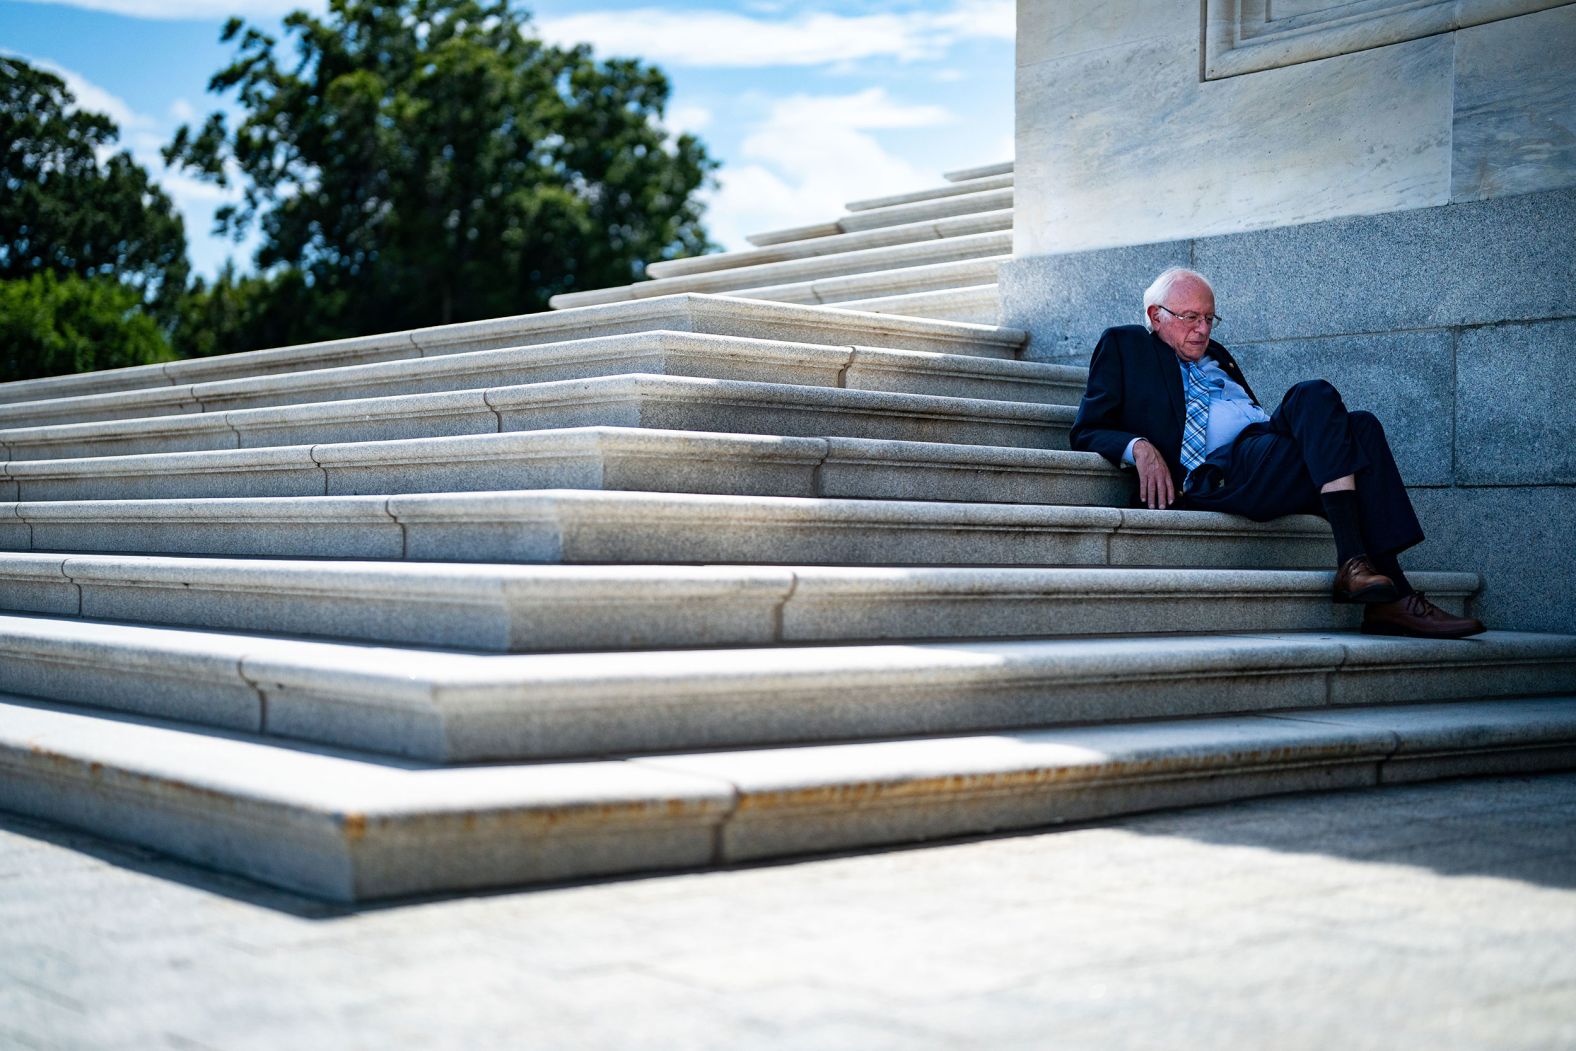 US Sen. Bernie Sanders sits in the shade on the steps of the Senate on Sunday, August 7. That afternoon, <a href="https://www.cnn.com/2022/08/07/politics/senate-democrats-climate-health-care-bill-vote/index.html" target="_blank">the Senate passed Democrats' $750 billion health care, tax and climate bill.</a>